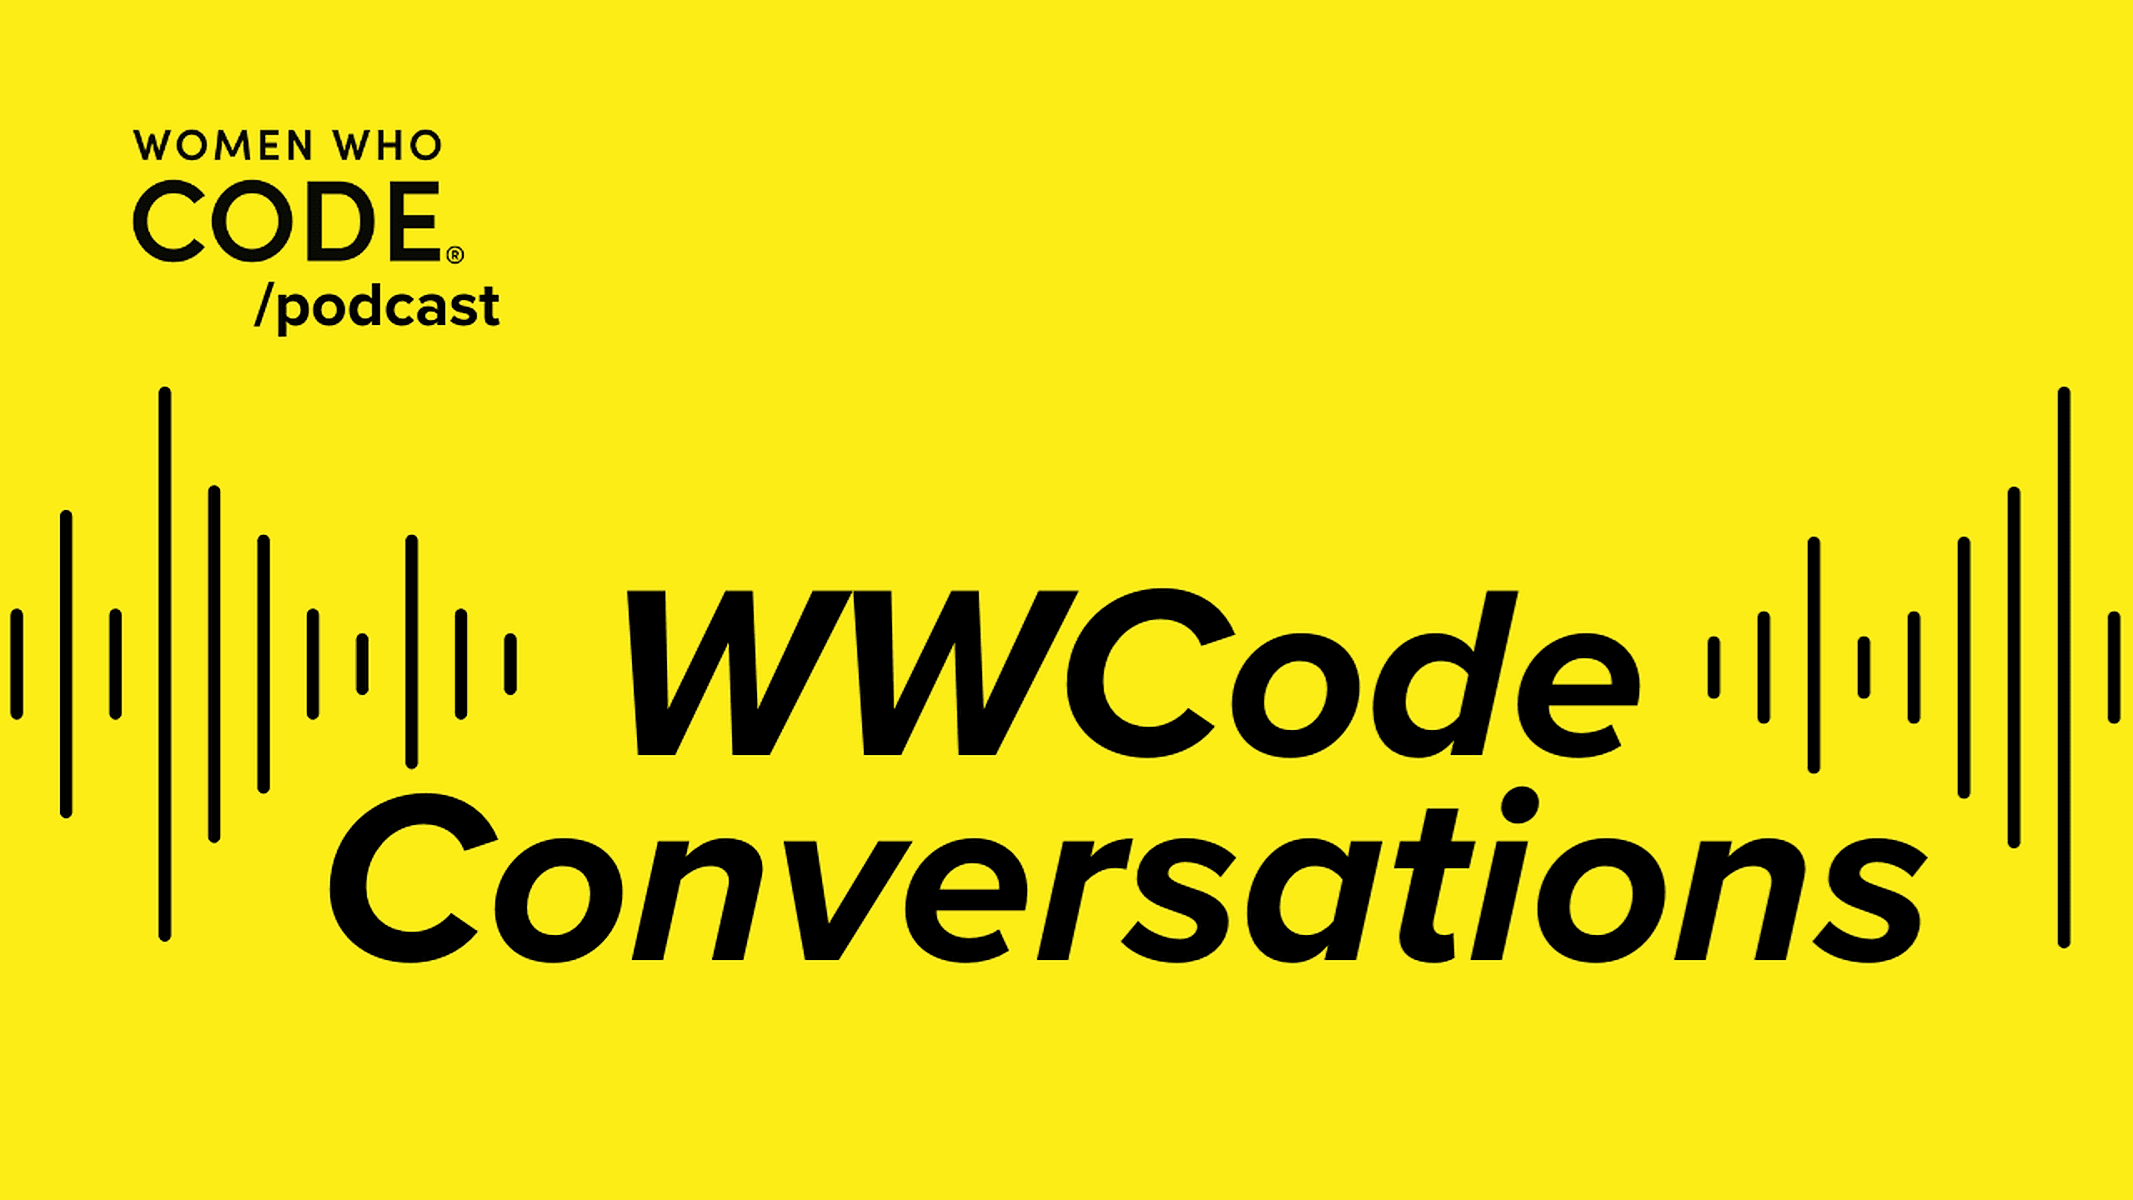 Featured image for WWCode Conversations #66: Payments and Capital product offerings for a Cannabis